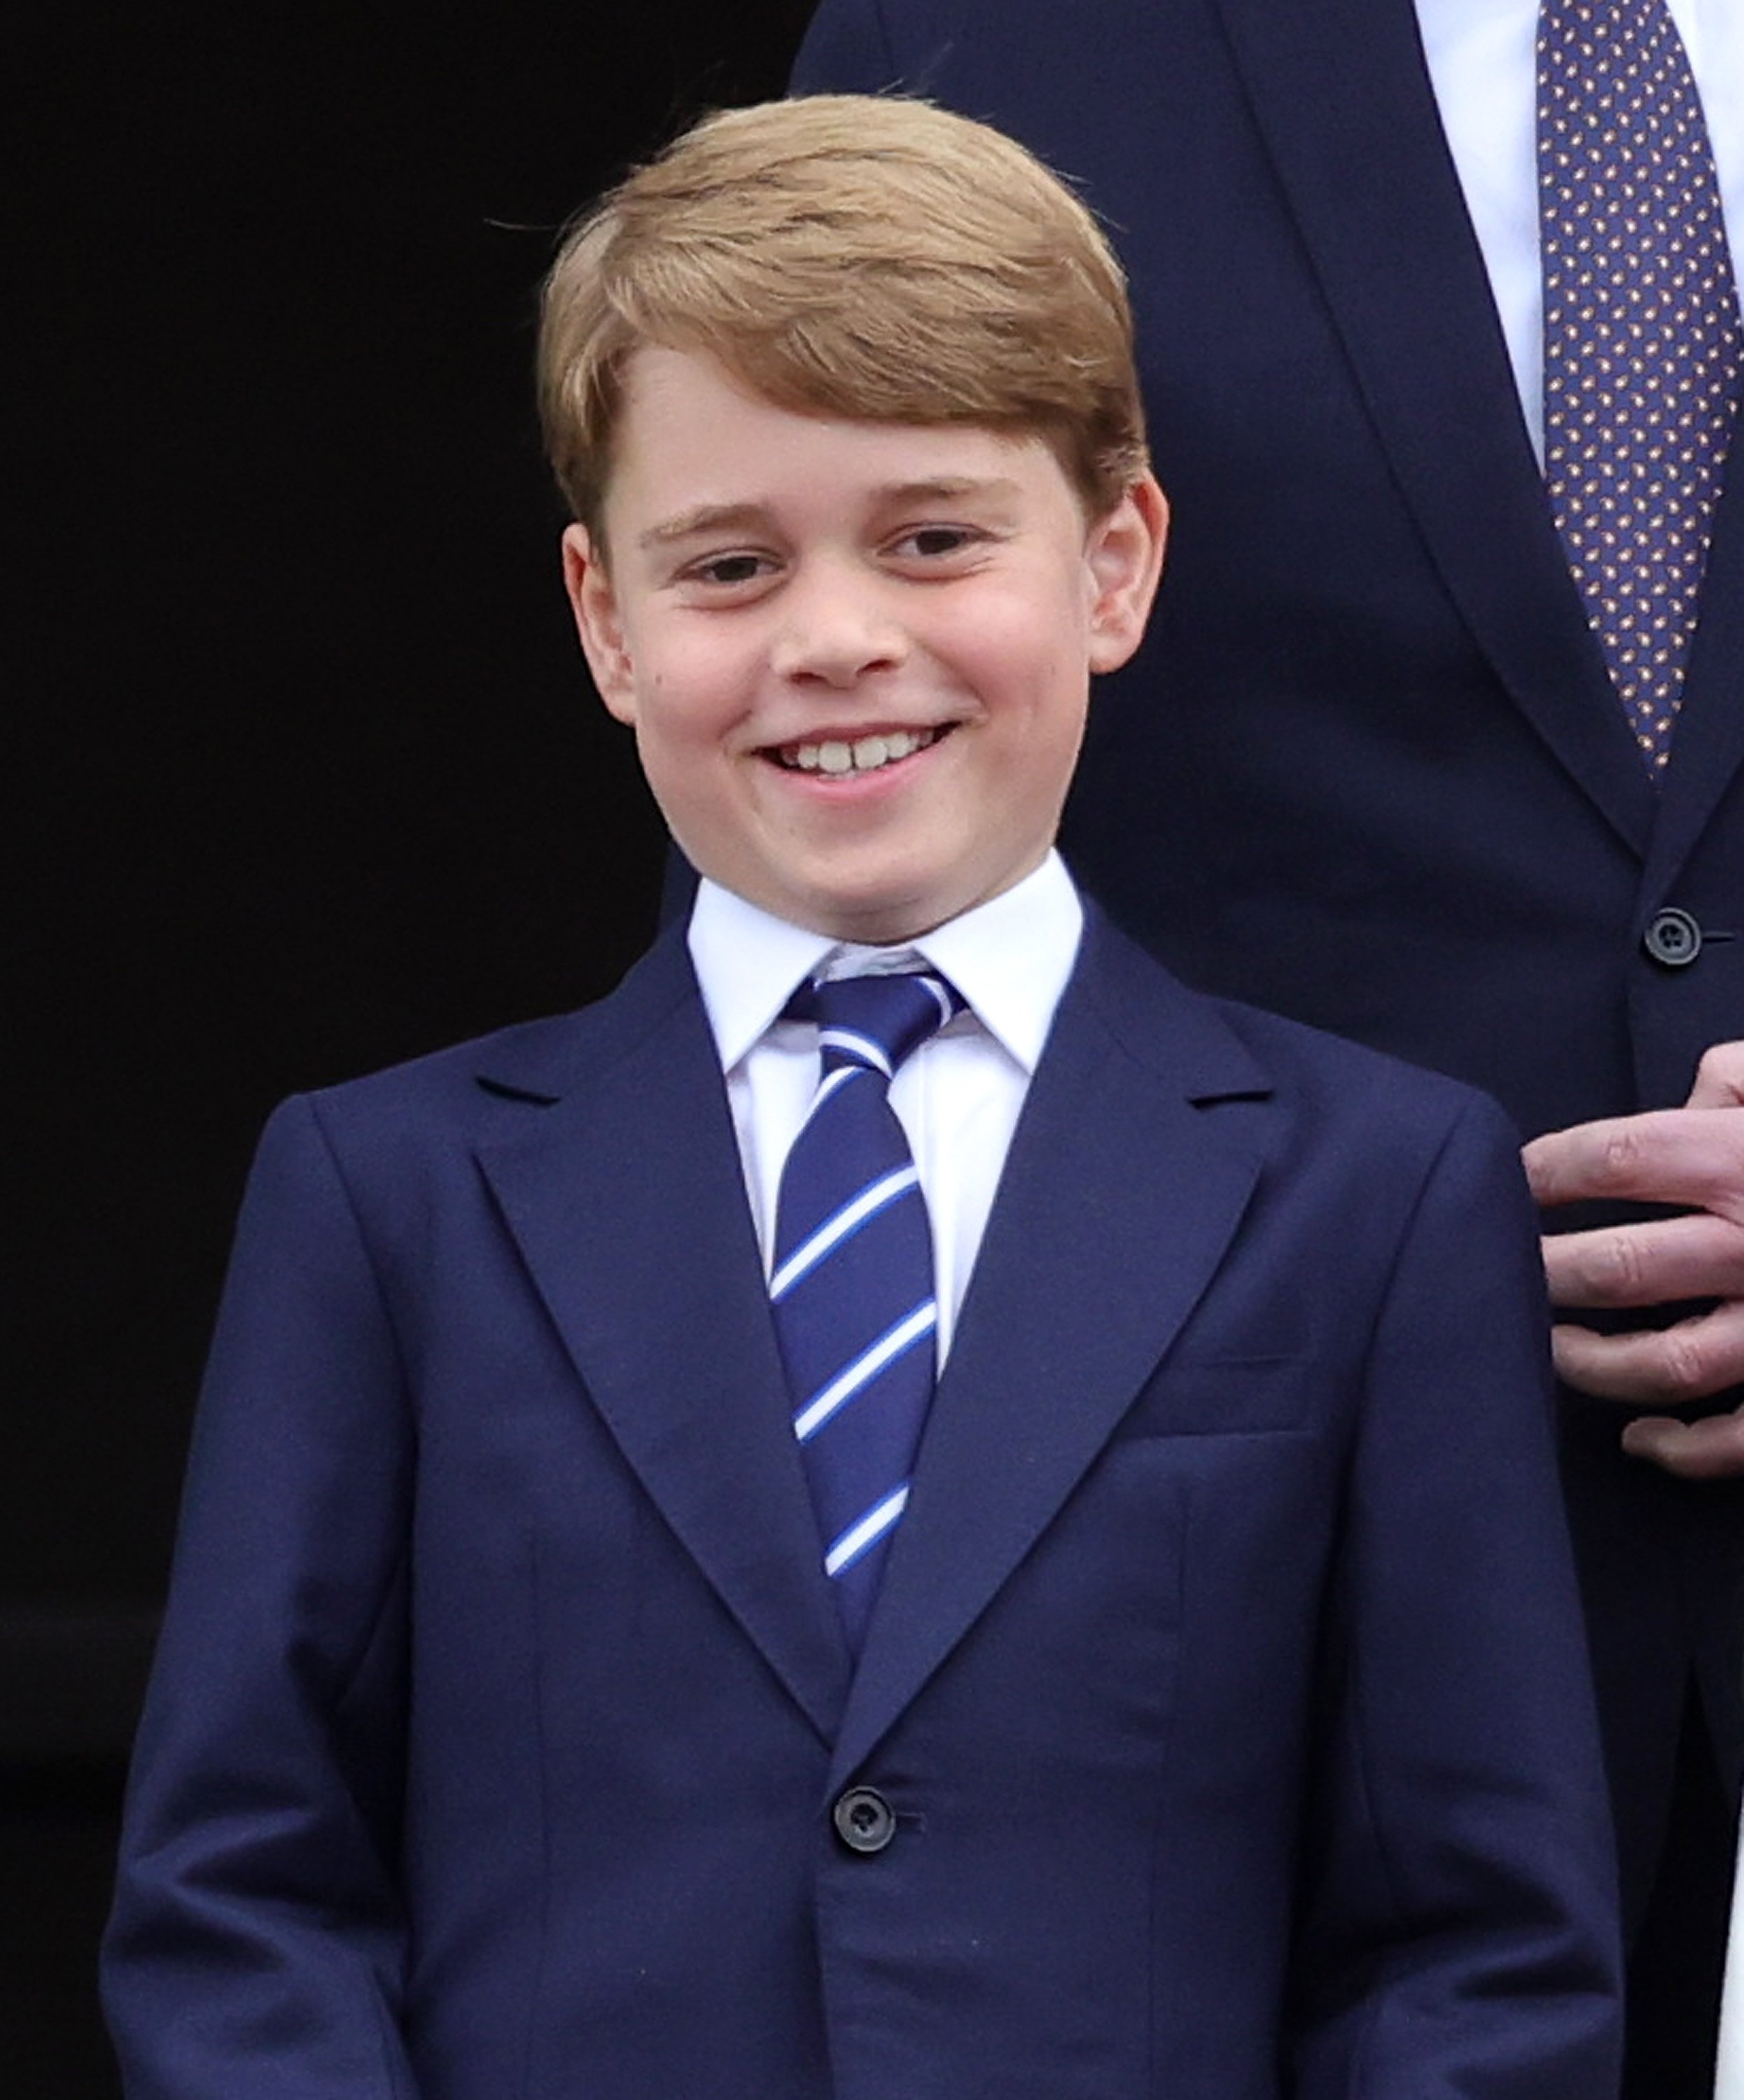 Prince George on the balcony of Buckingham Palace during the Platinum Jubilee Pageant on June 05, 2022 in London, England. | Source: Getty Images